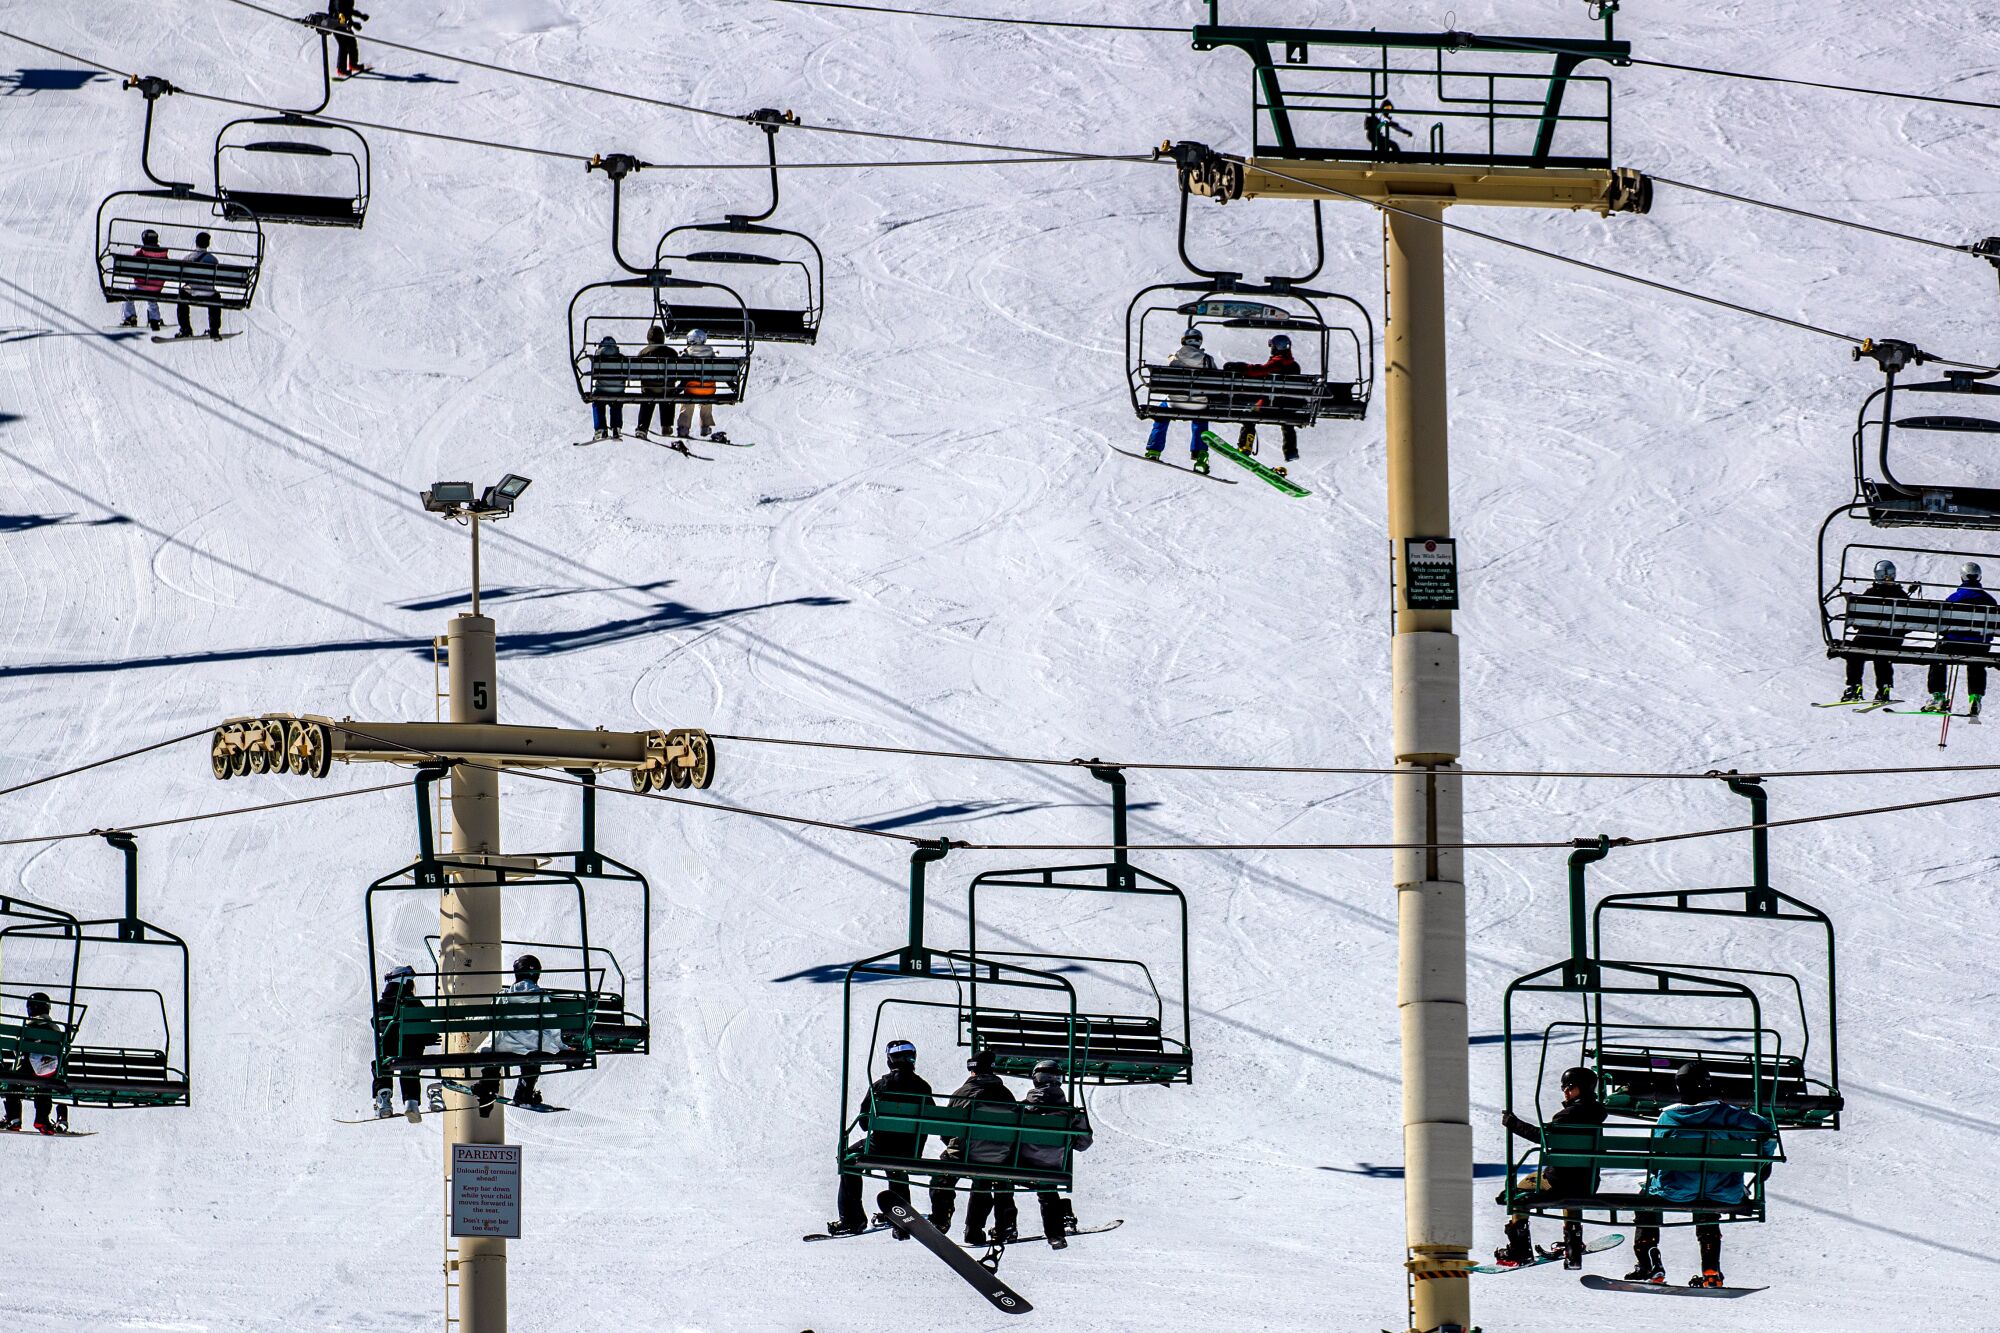 Skiers and snowboarders ride a chairlift at Big Bear Mountain Resort.